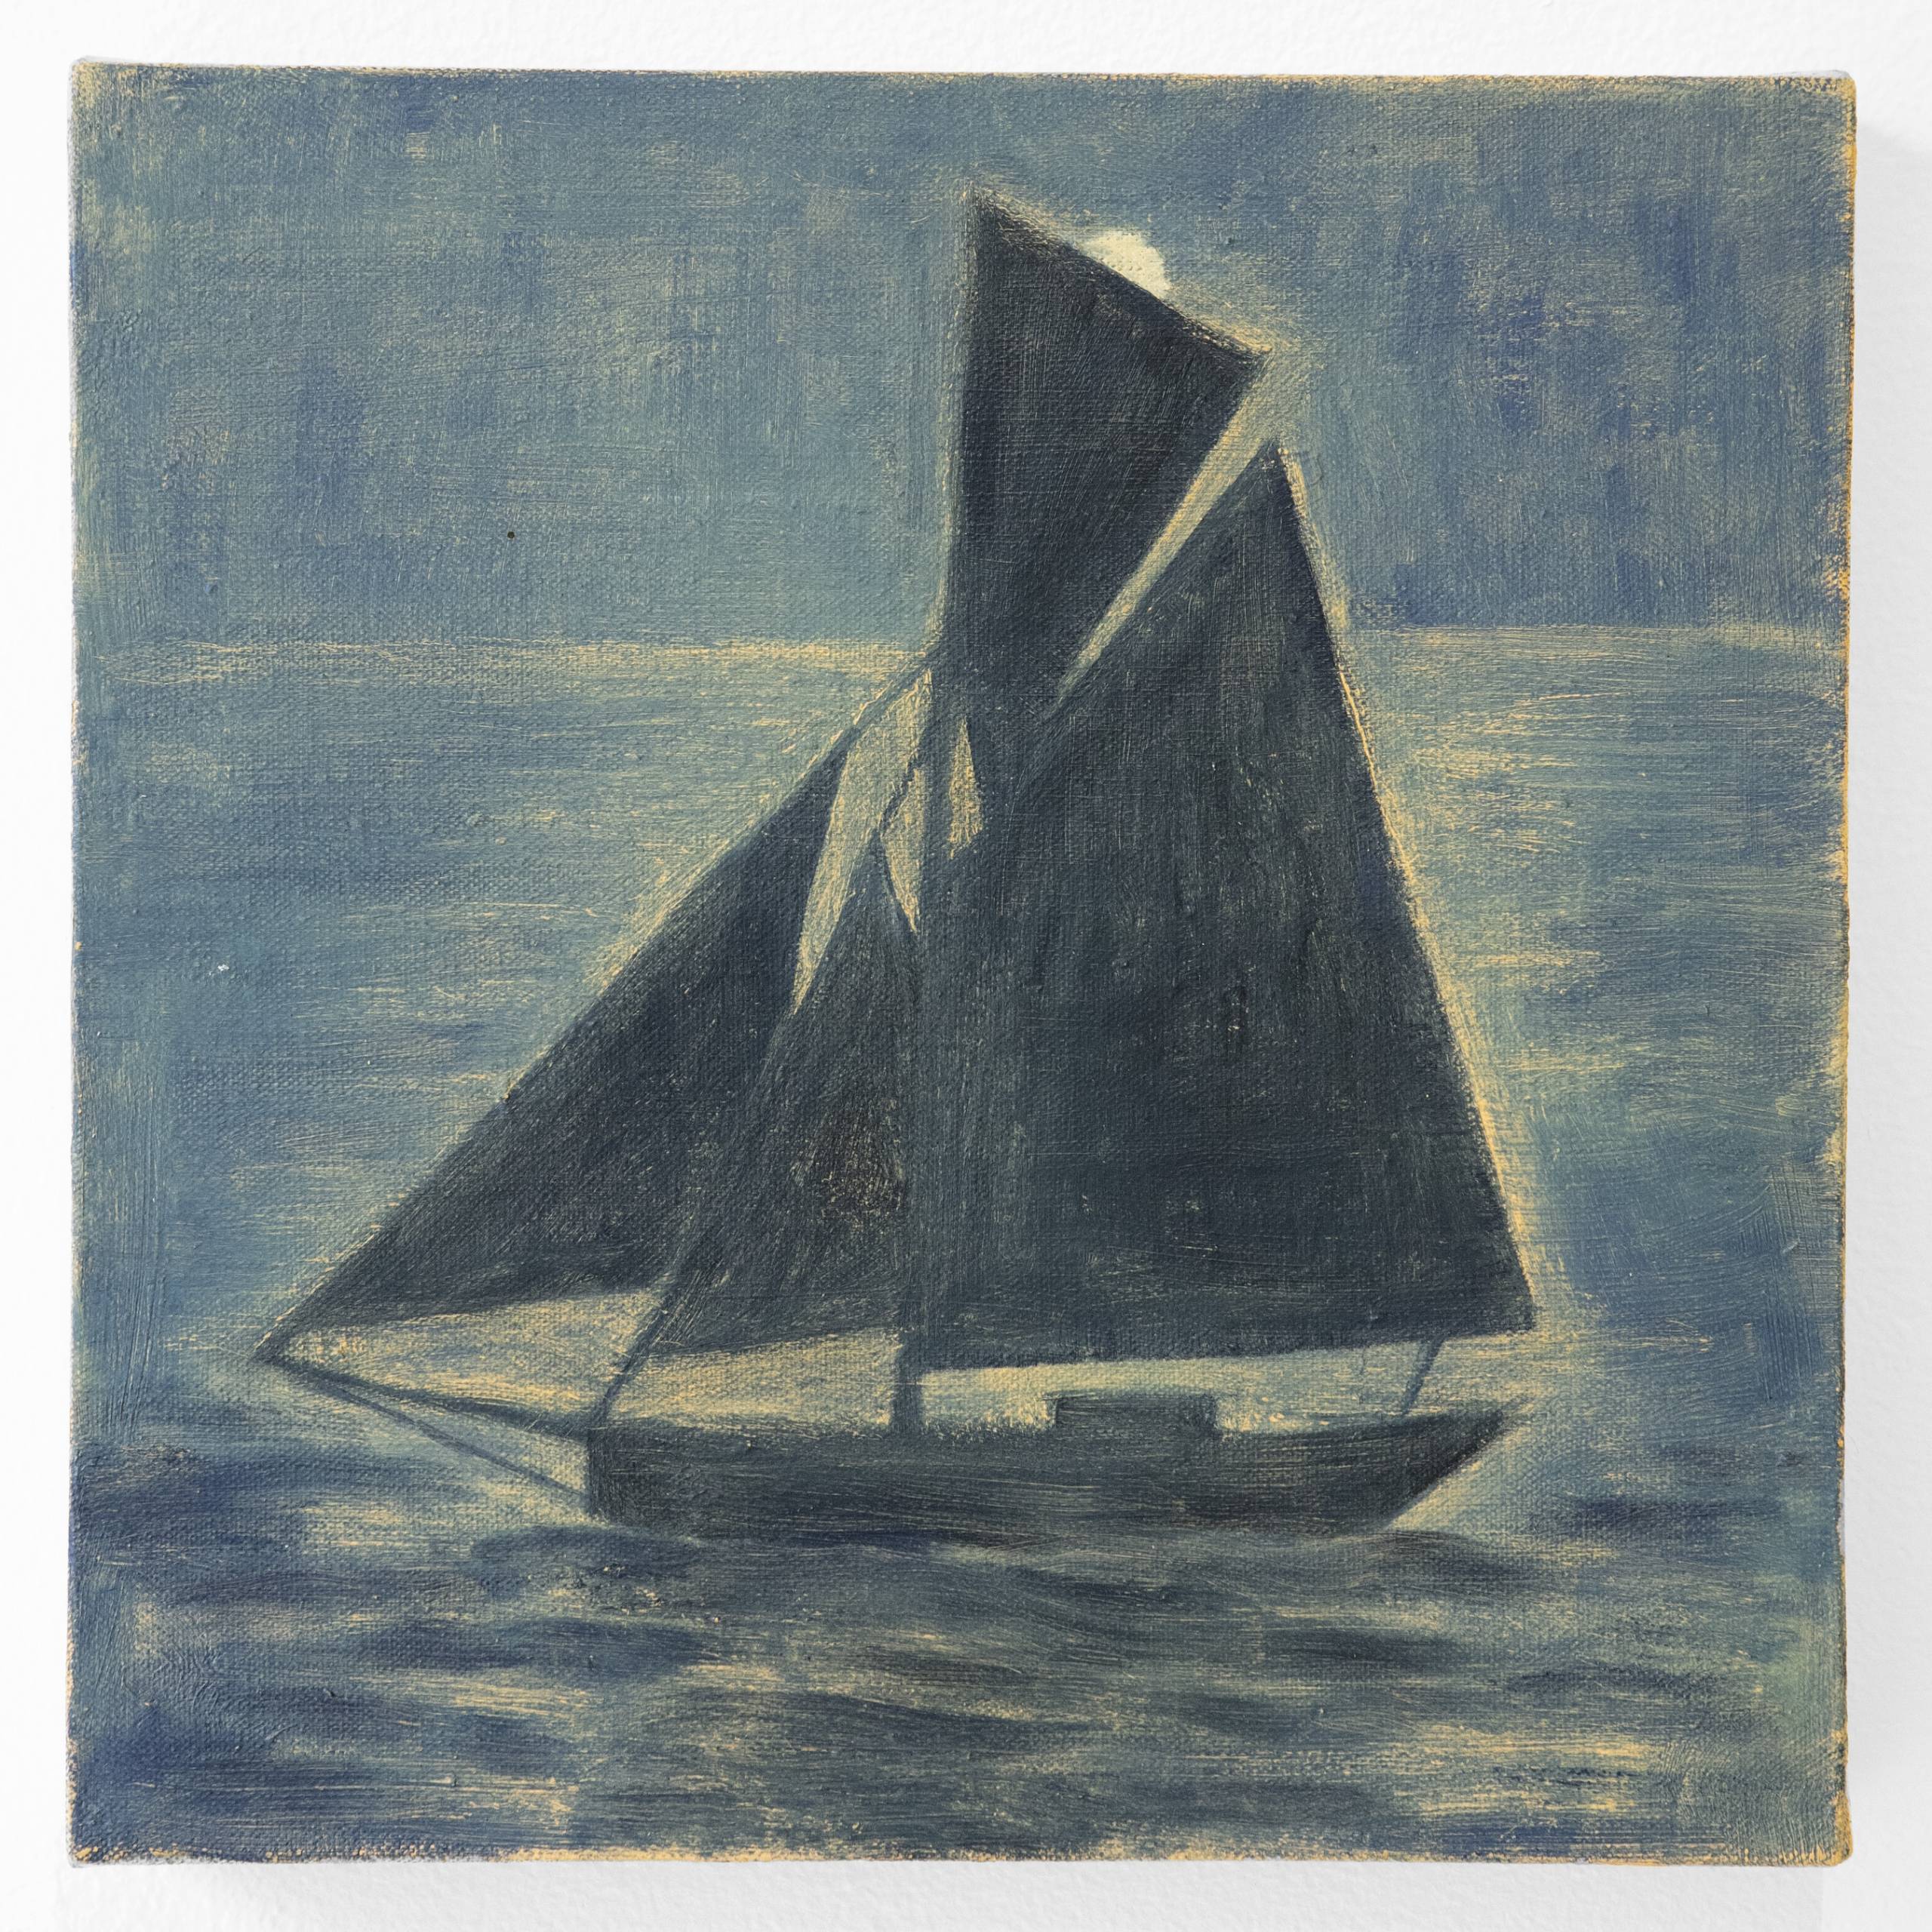 Painting of sailboat in silhouette against blue water and sky